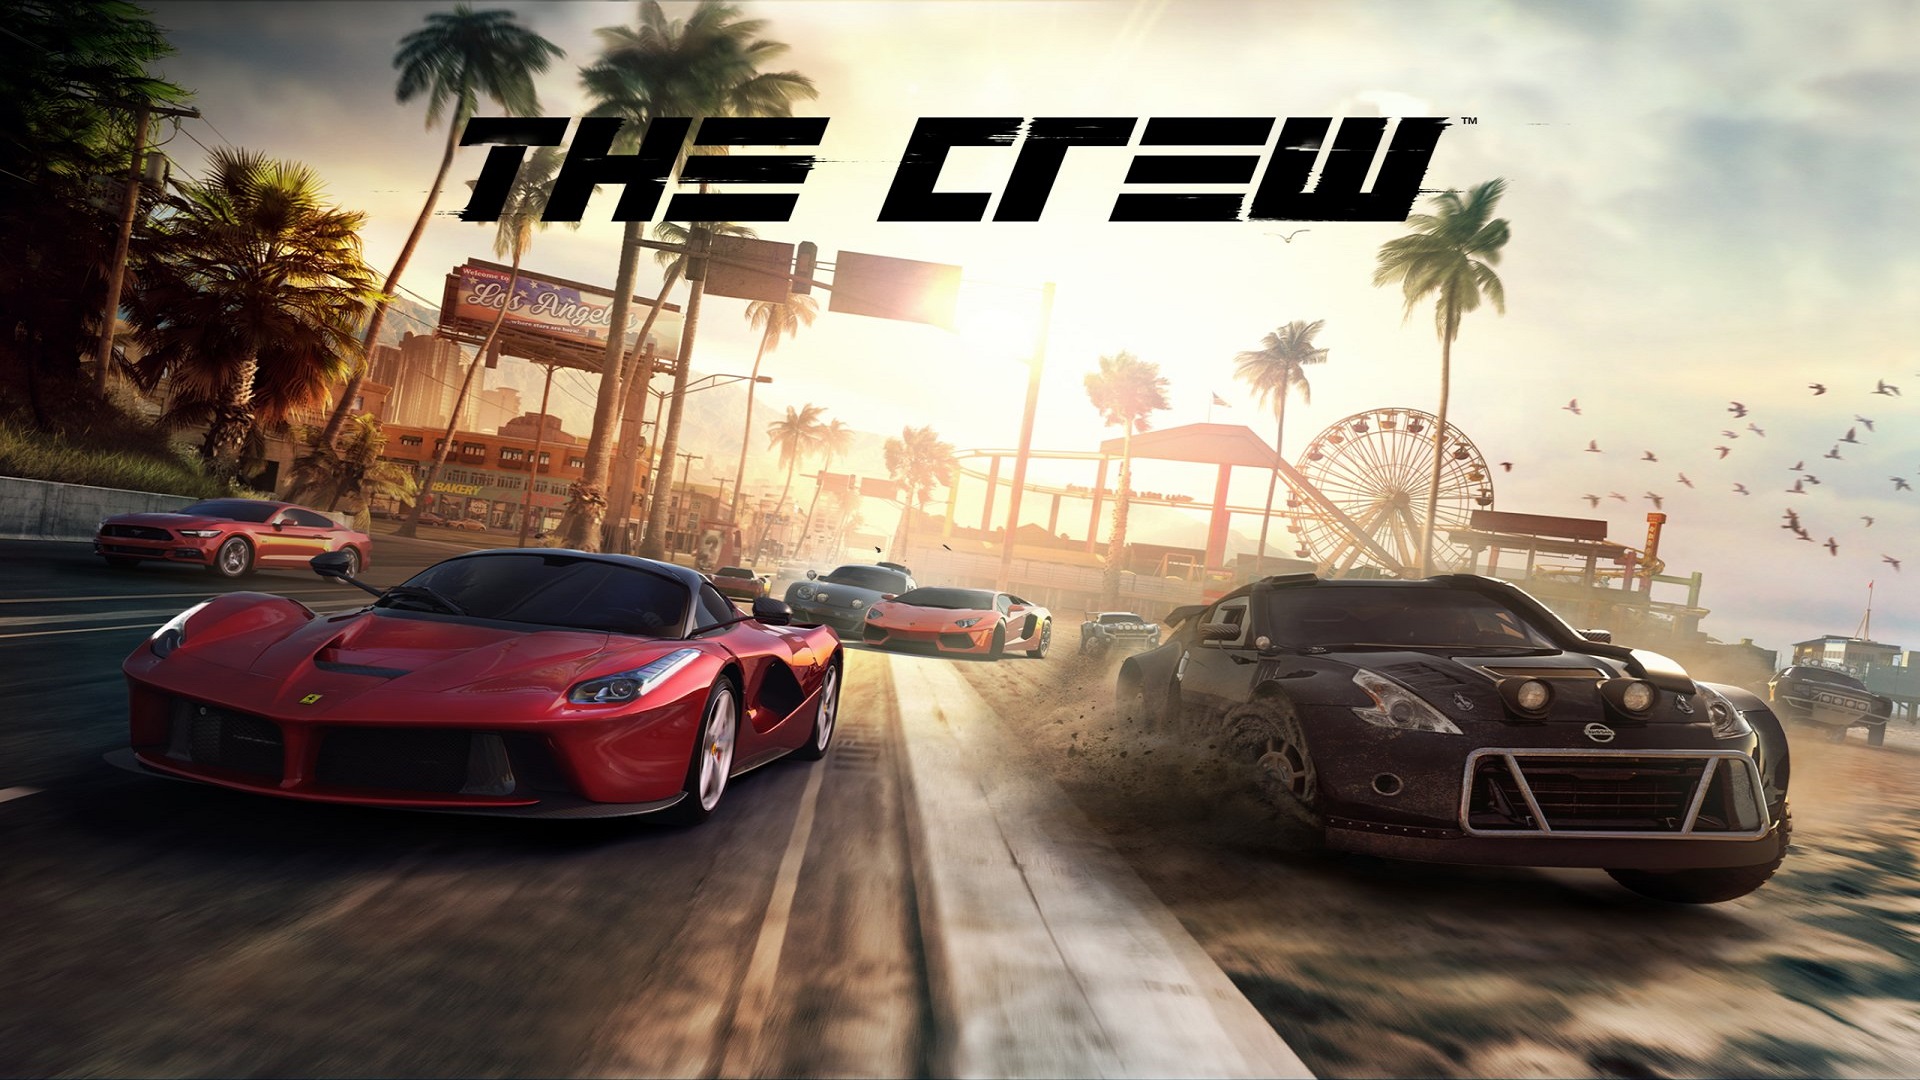 The Crew hot hd wallpapers